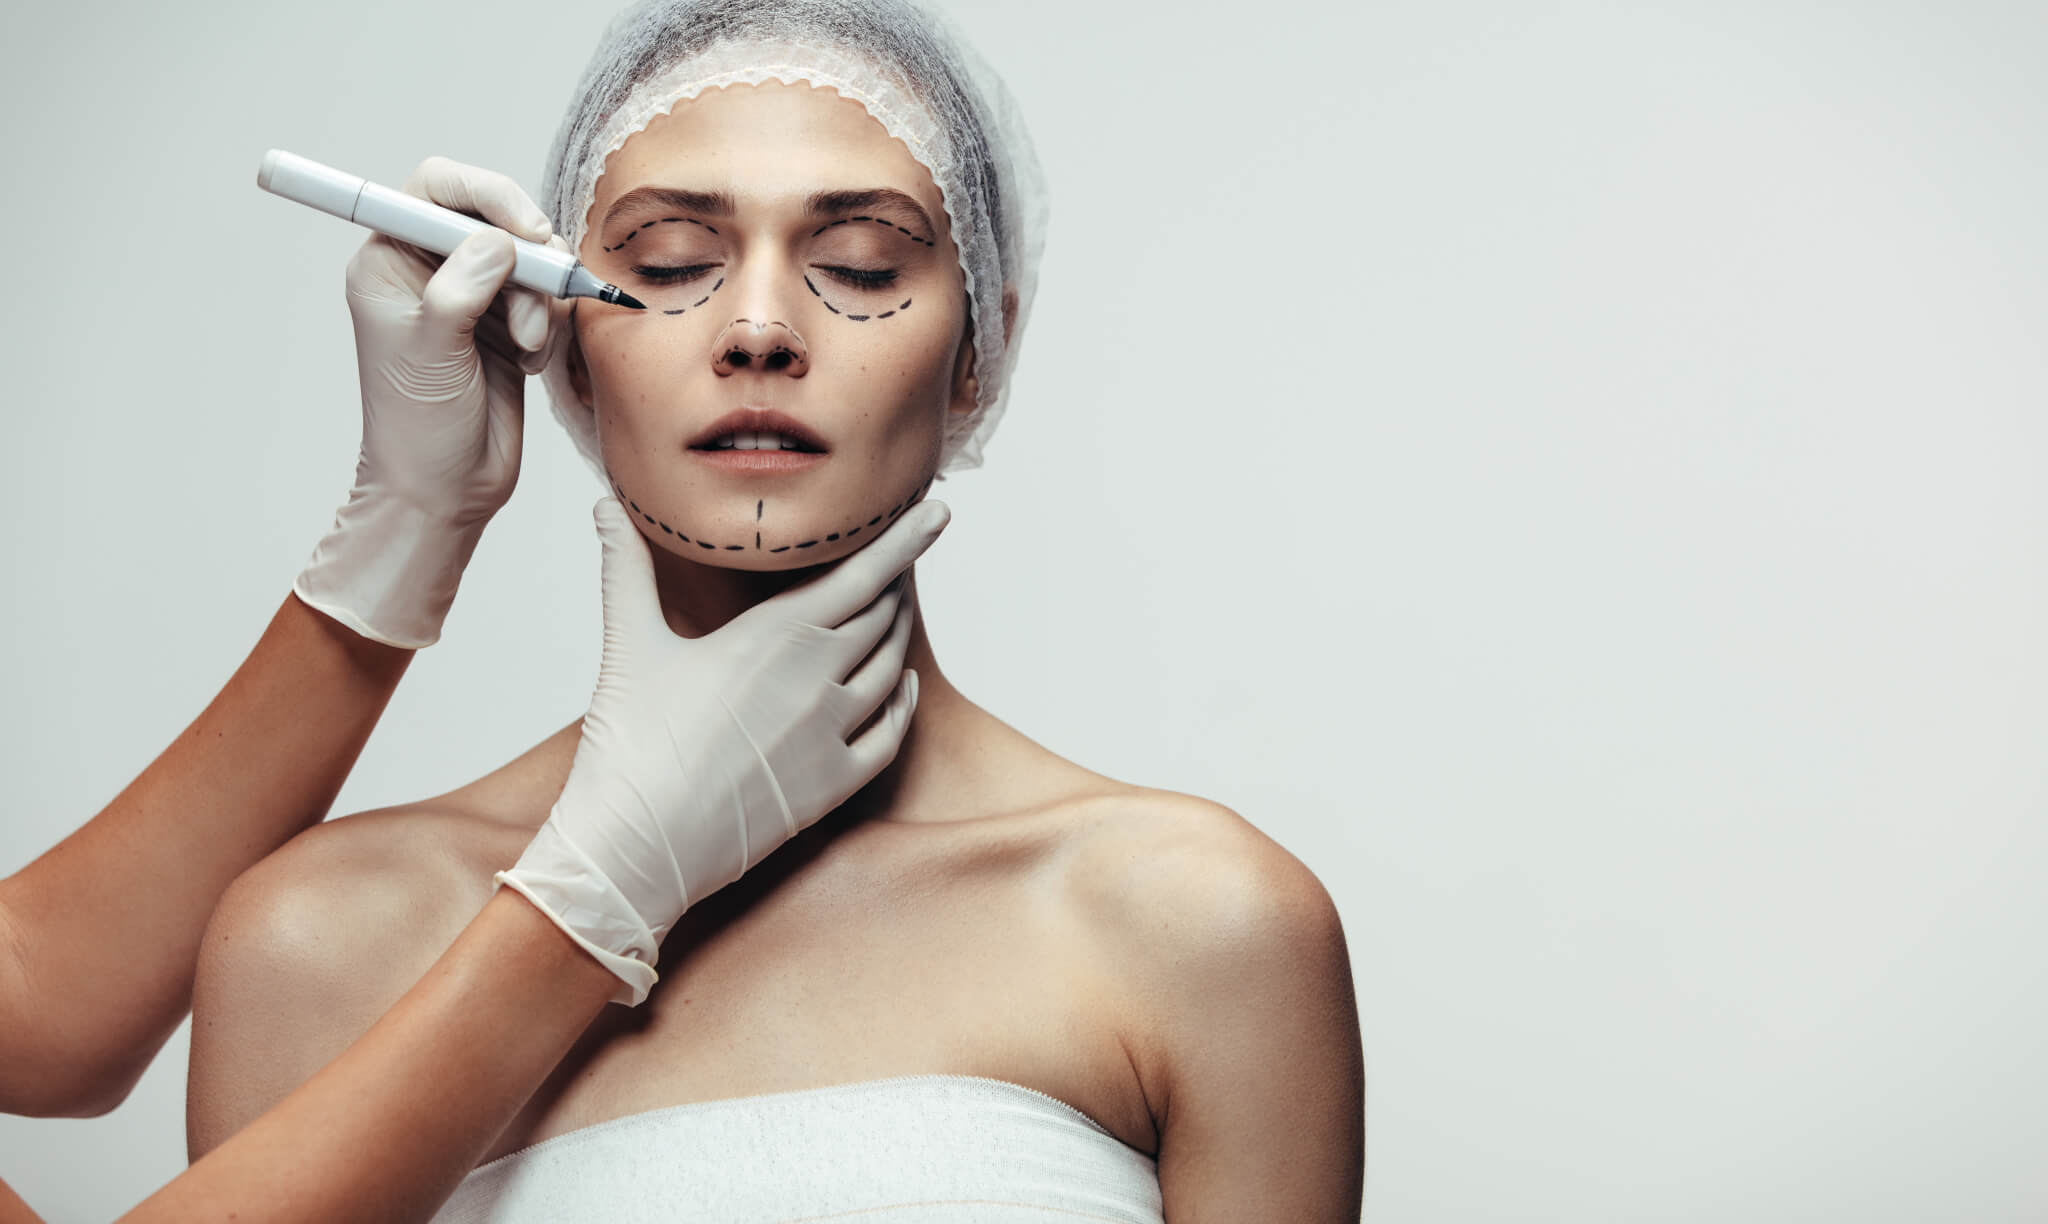 Cosmetic Surgery and Mental Health